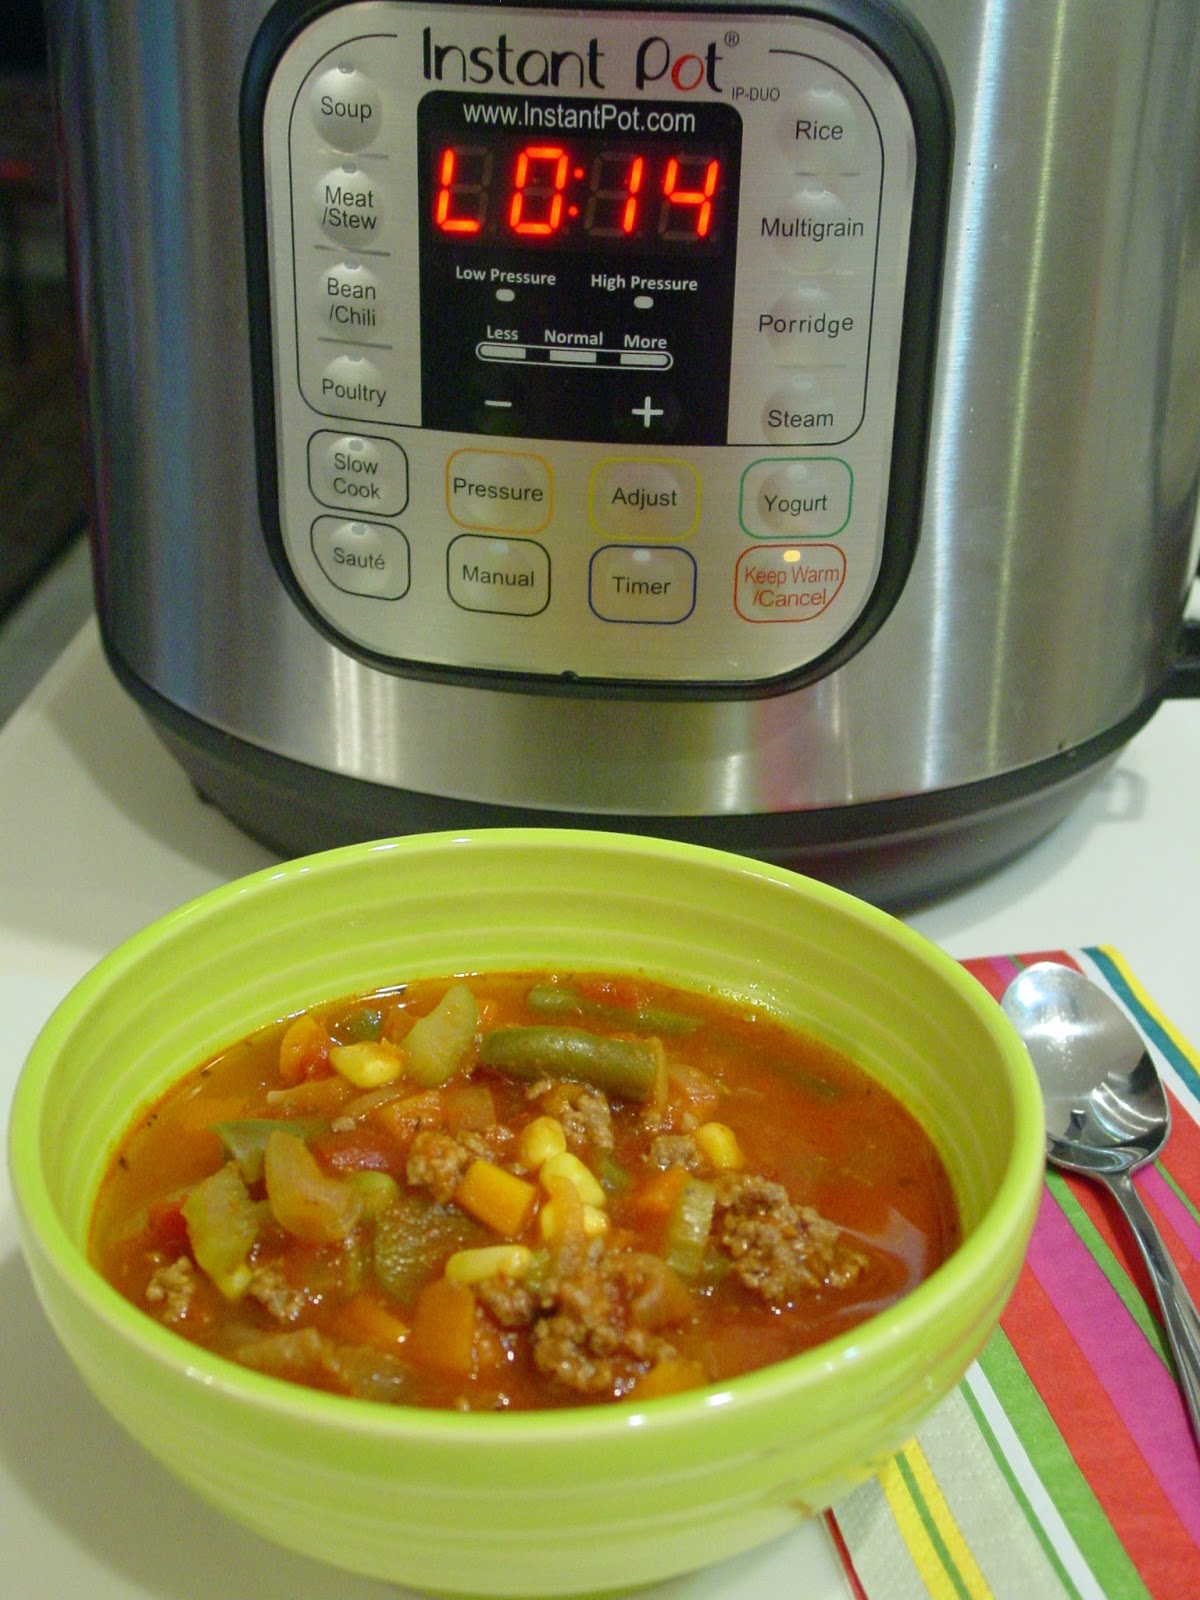 Soup Spice Everything Nice: Instant Pot Spicy Beef Vegetable Soup